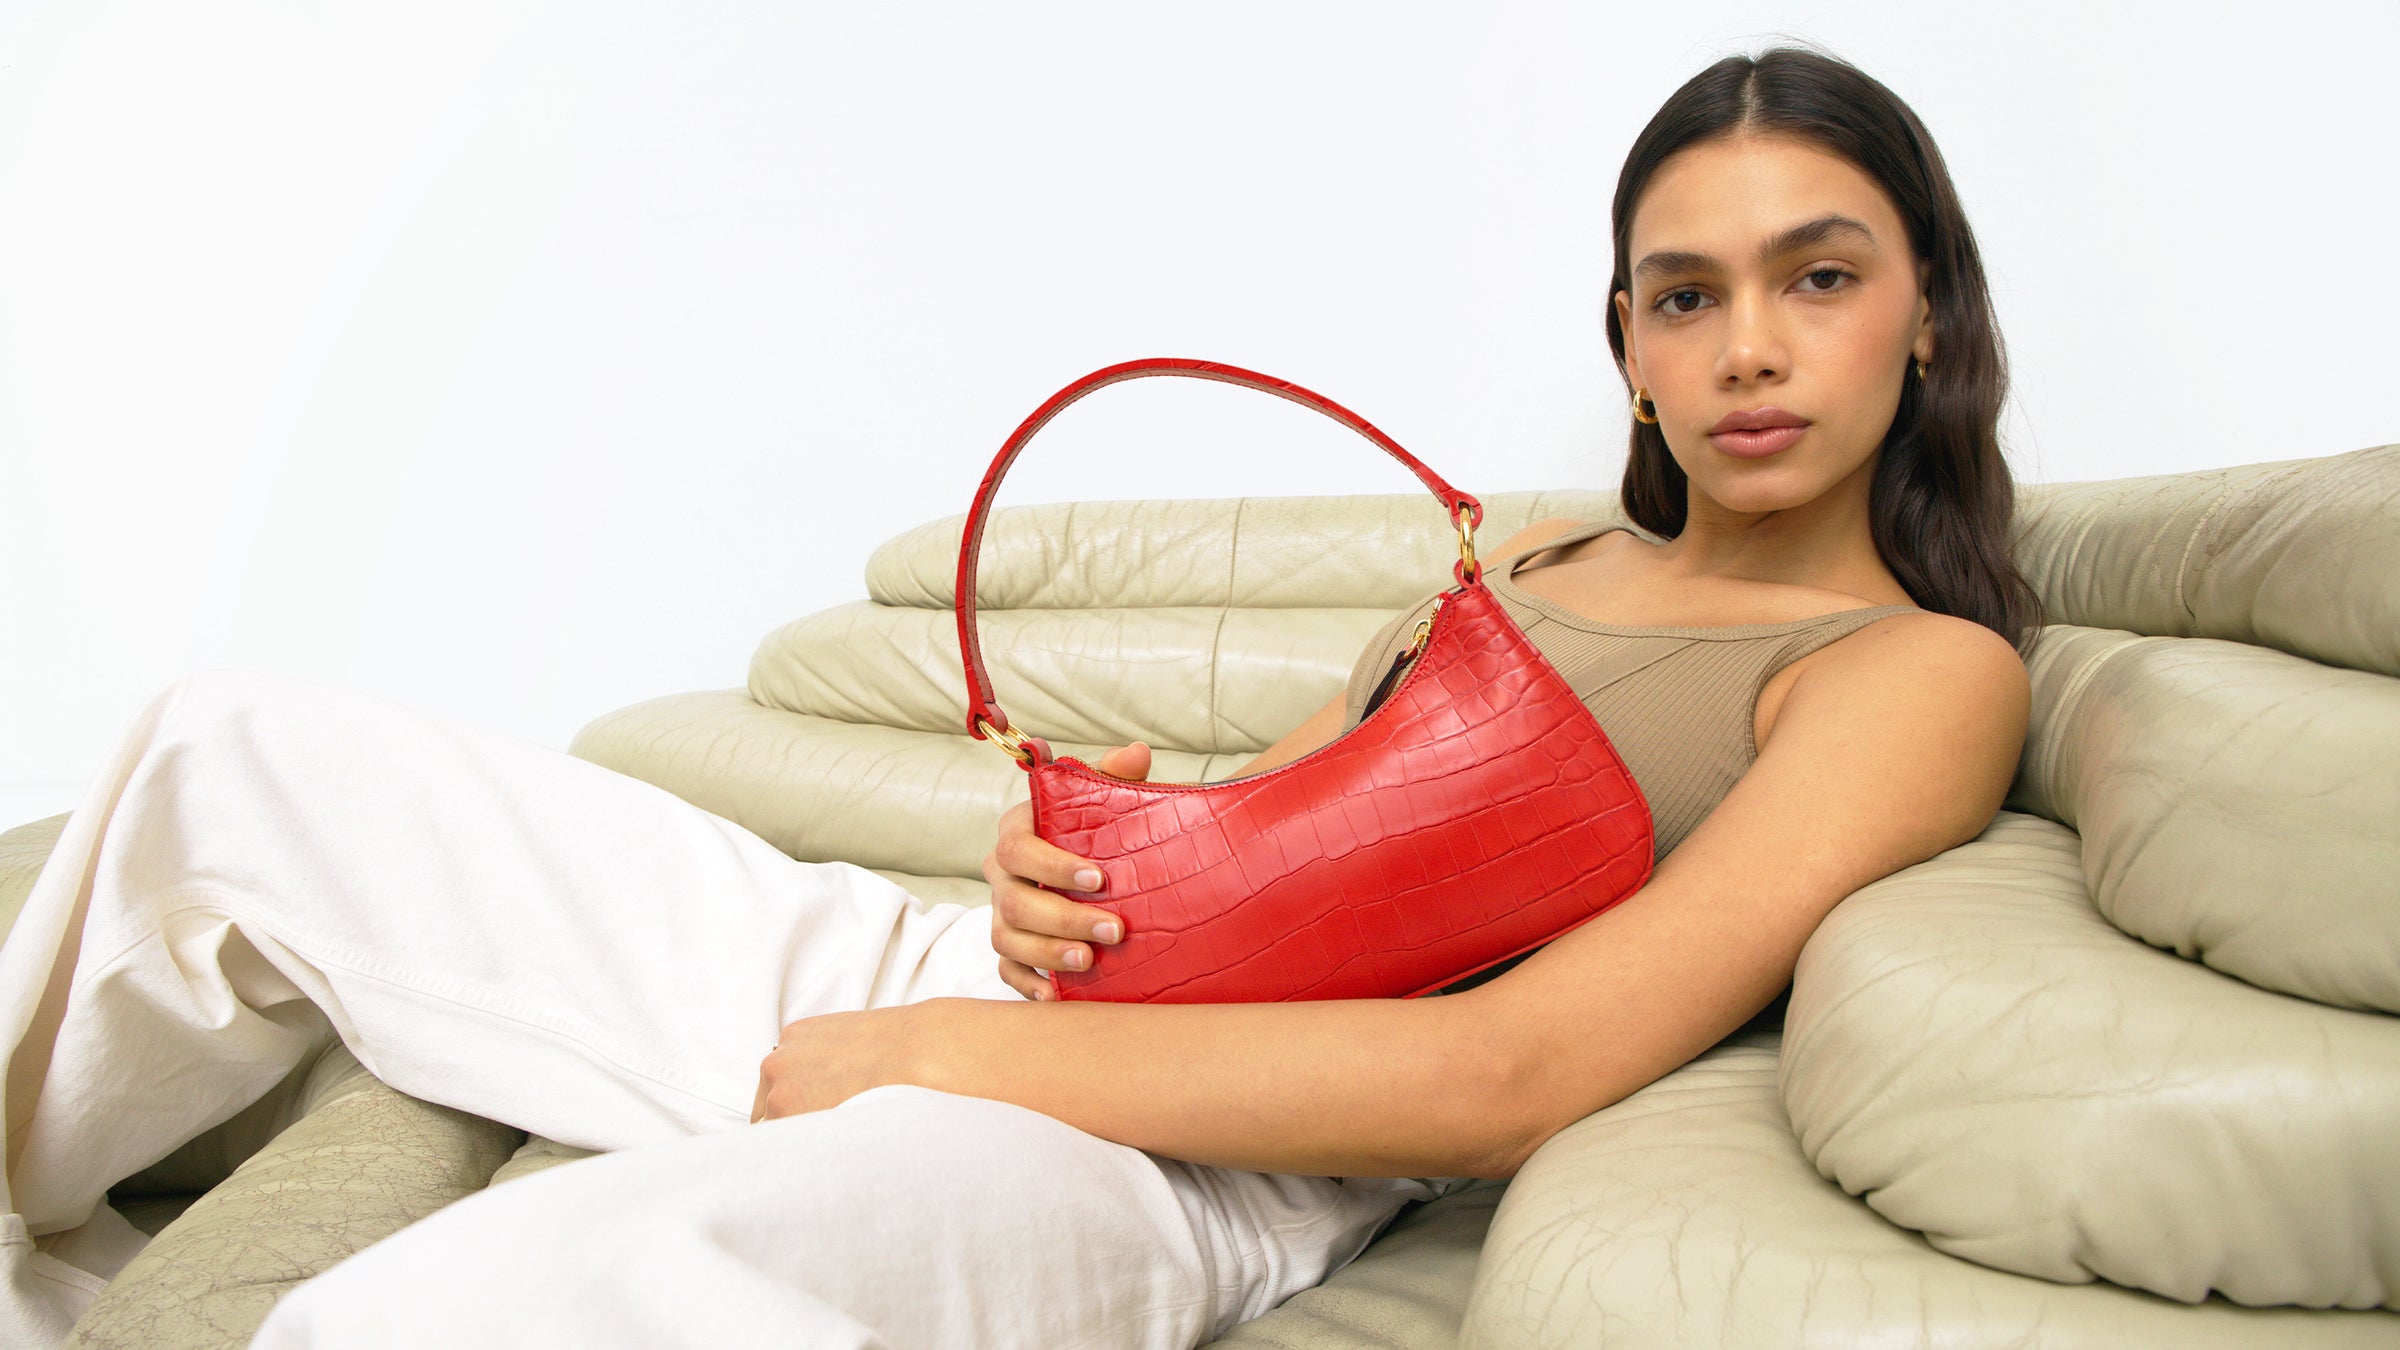 woman lounging on a beige vintage chair wears a tan top, white pants and a bright red croc mini shoulder bag.